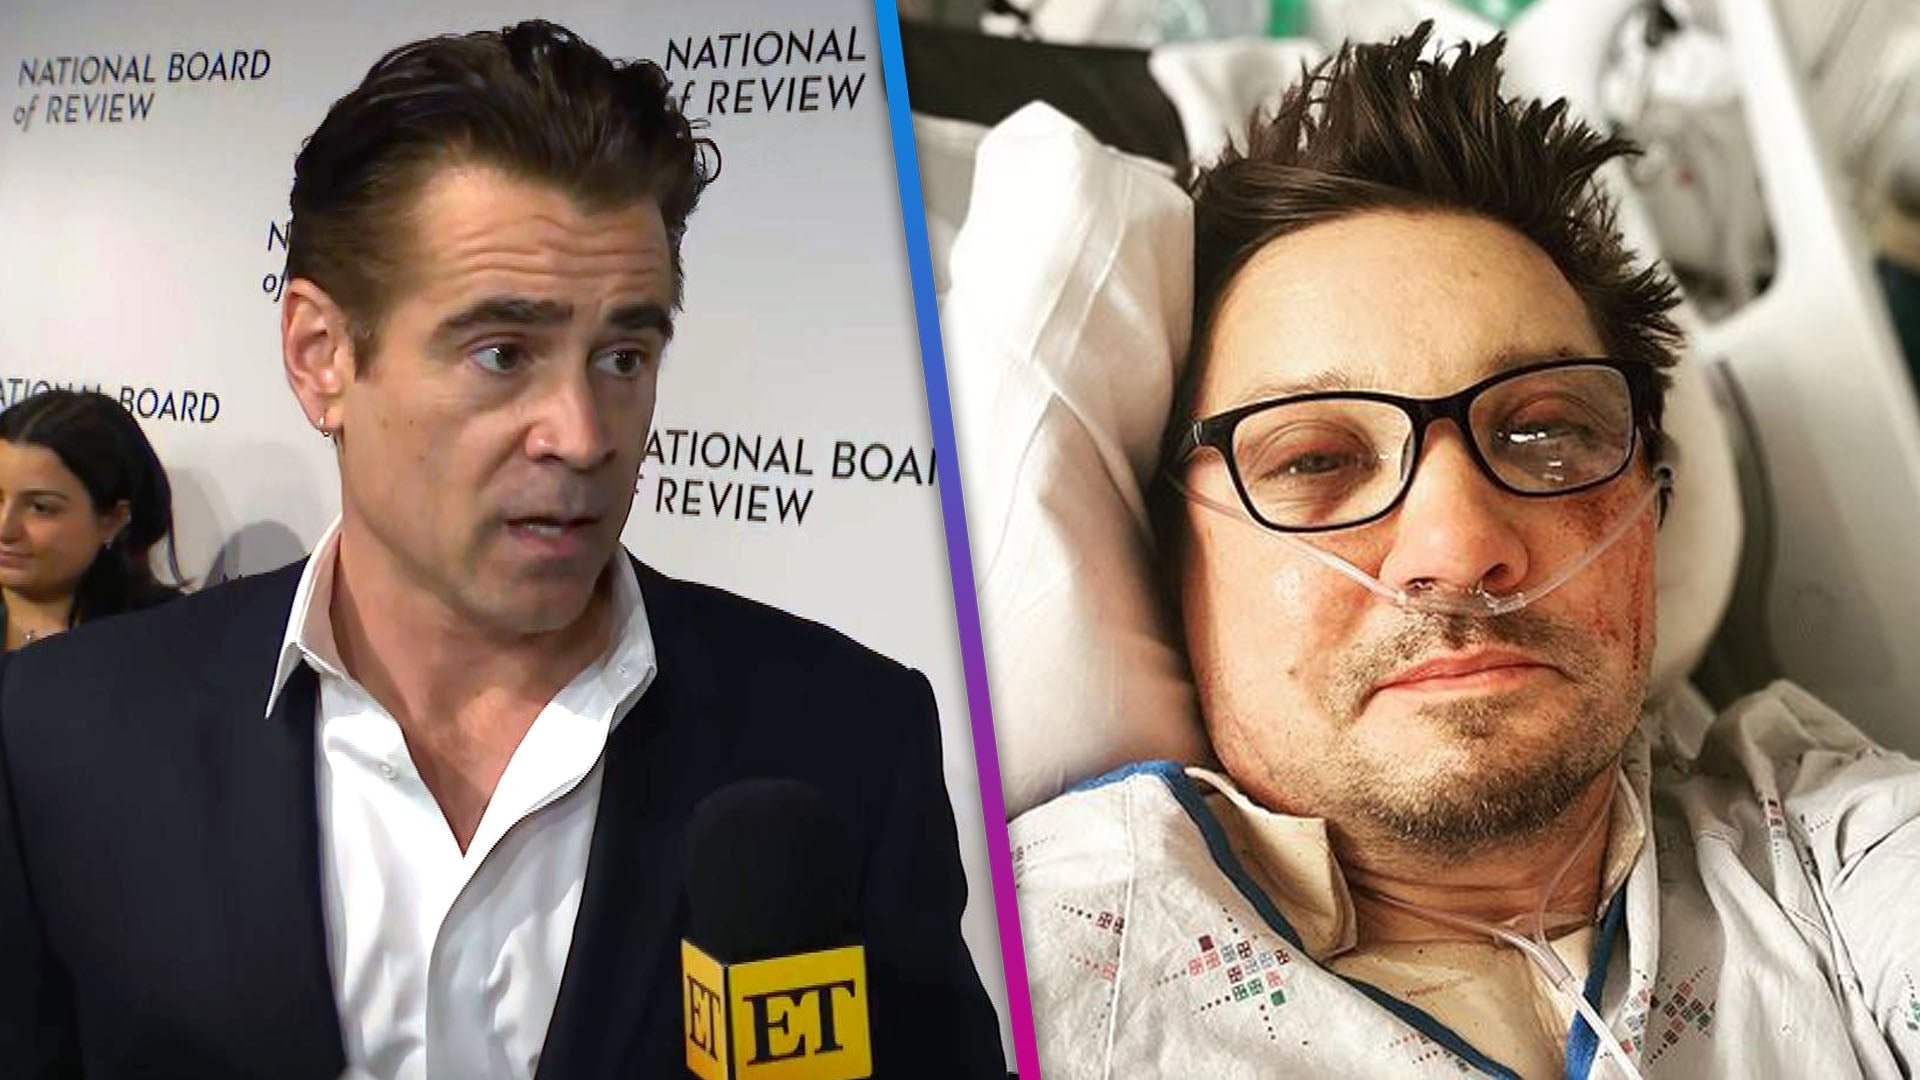 Colin Farrell Says His ‘Prayers’ Are With Former Co-Star Jeremy Renner (Exclusive)